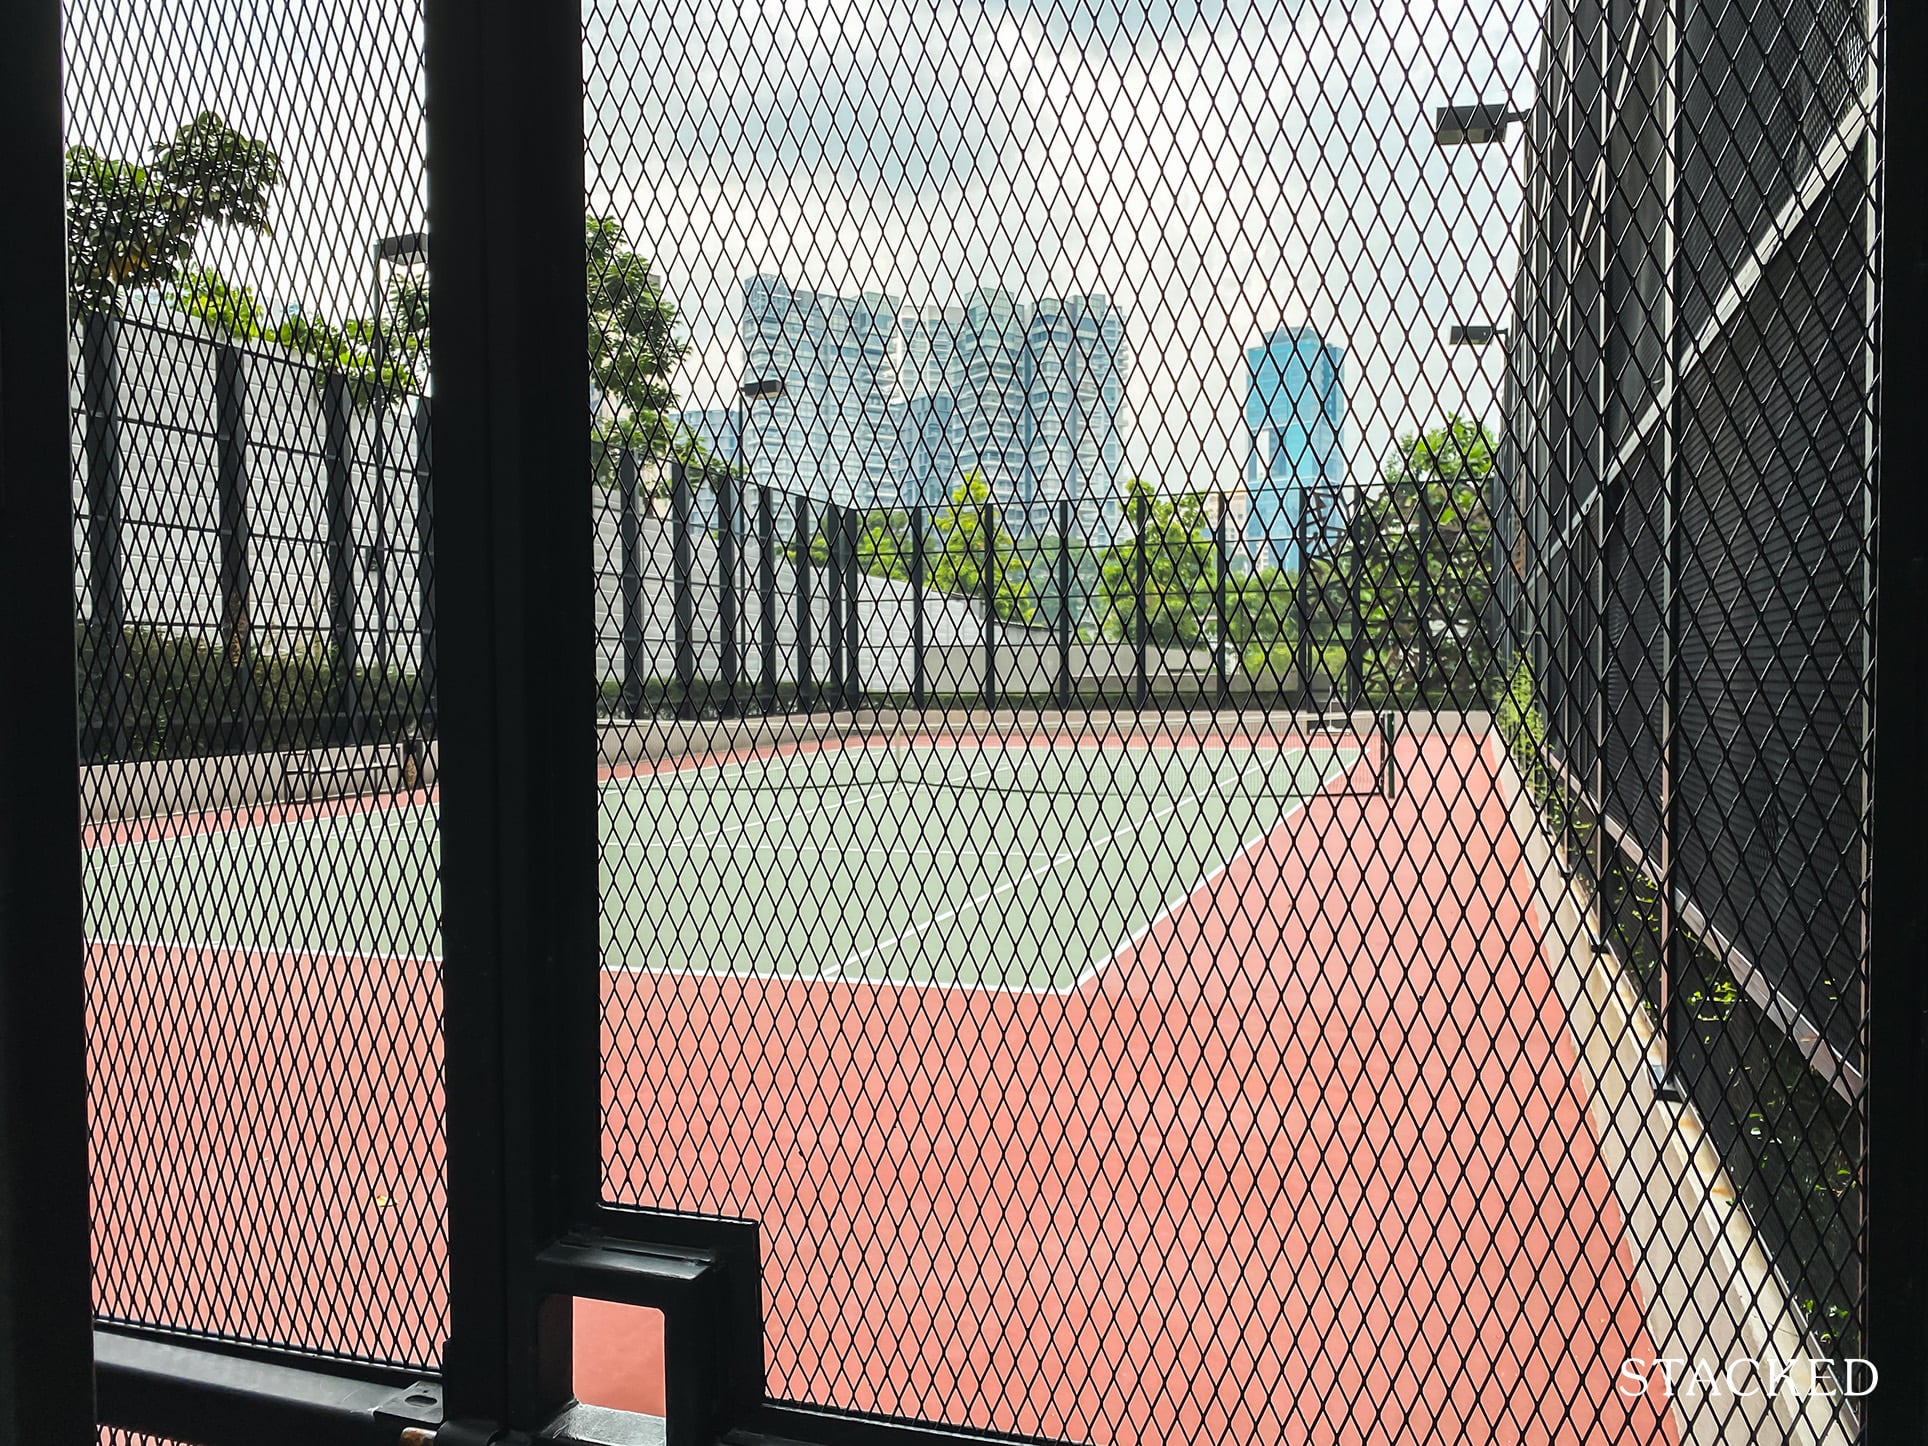 OUE Twin Peaks tennis court